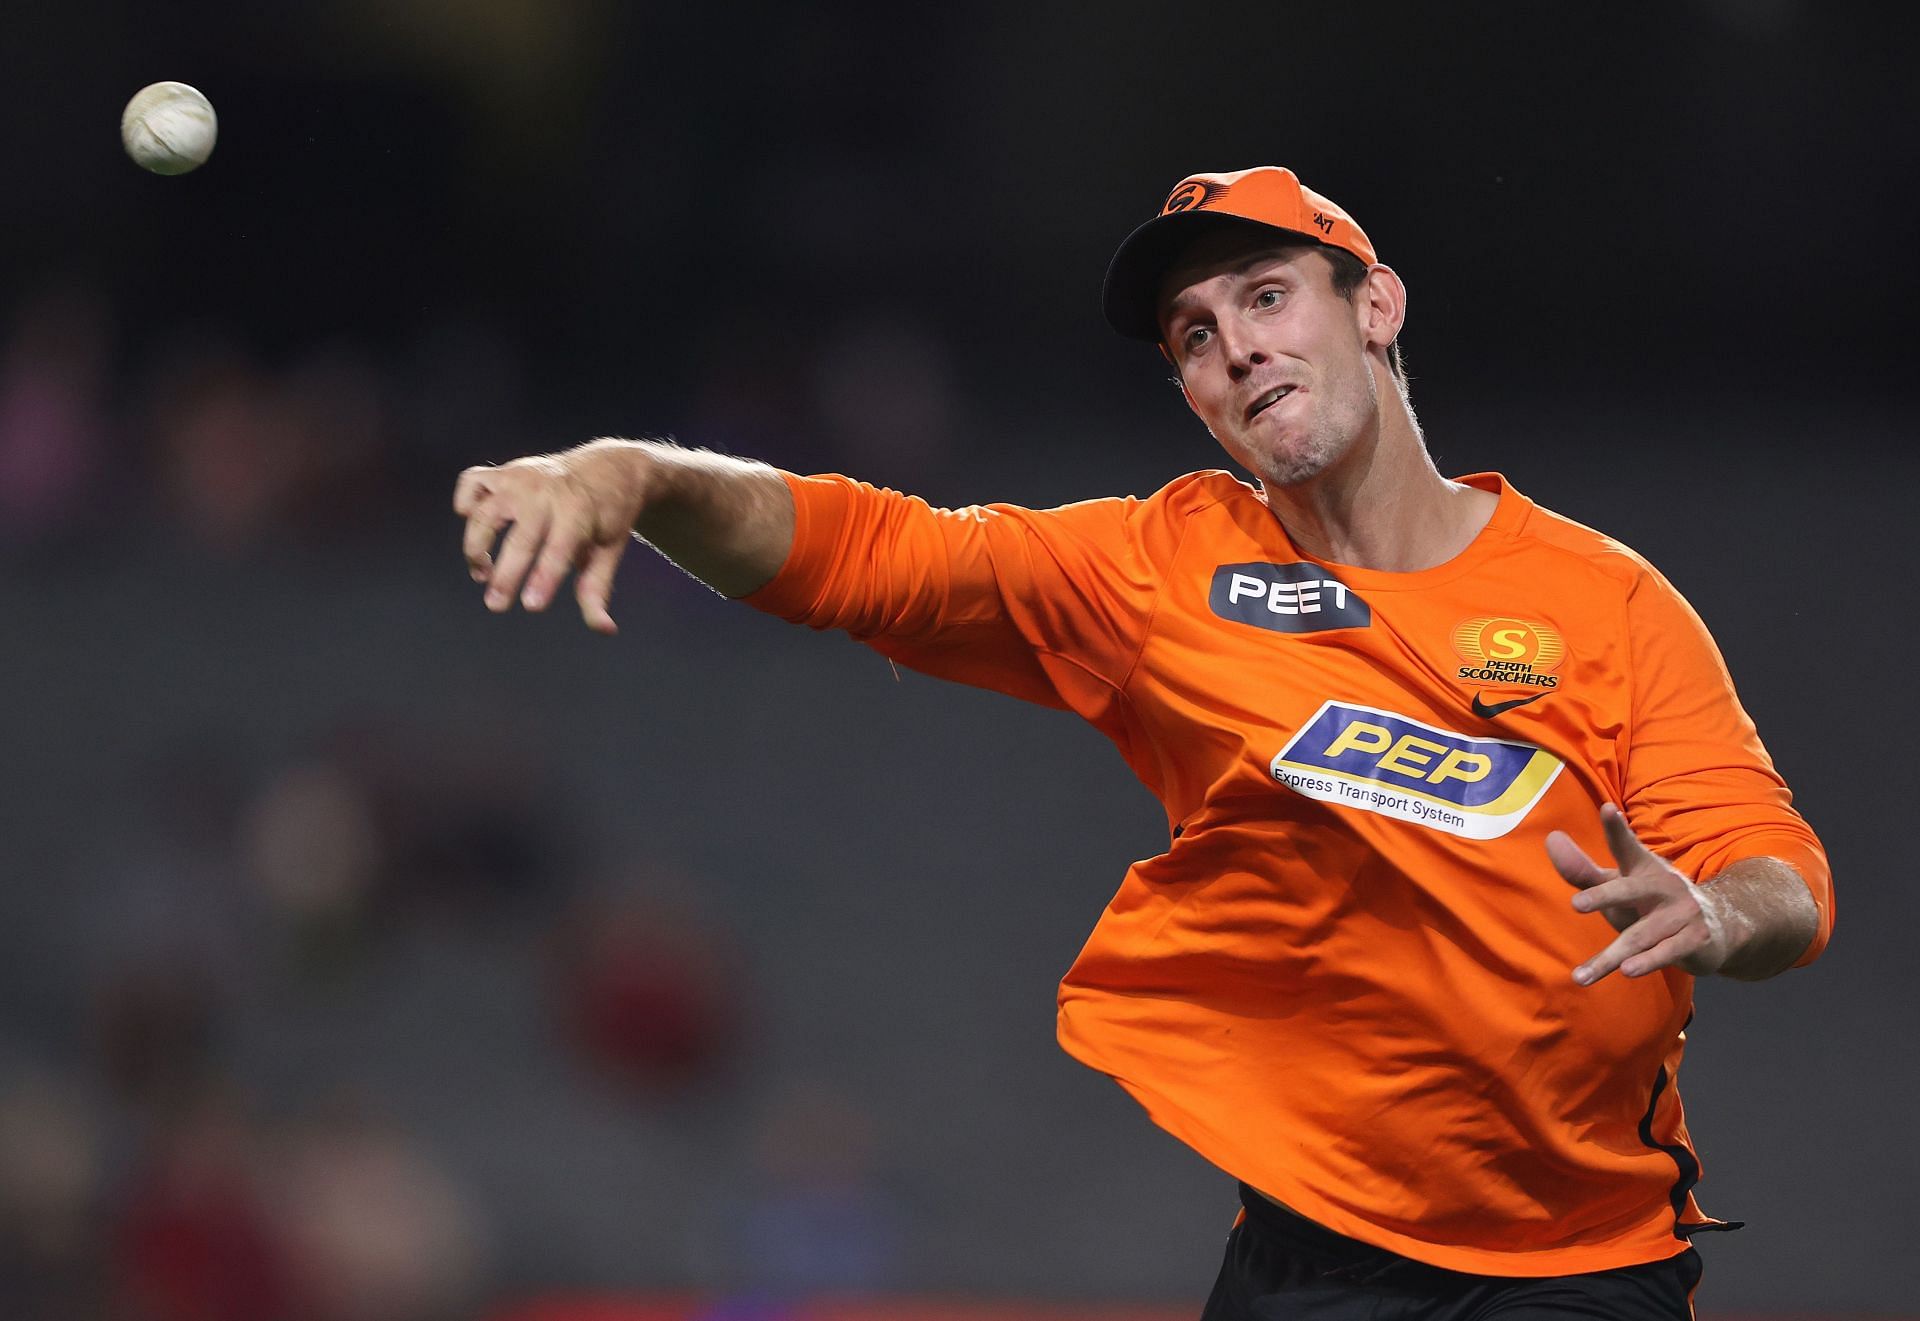 Mitchell Marsh made his IPL debut for the Deccan Chargers in 2010